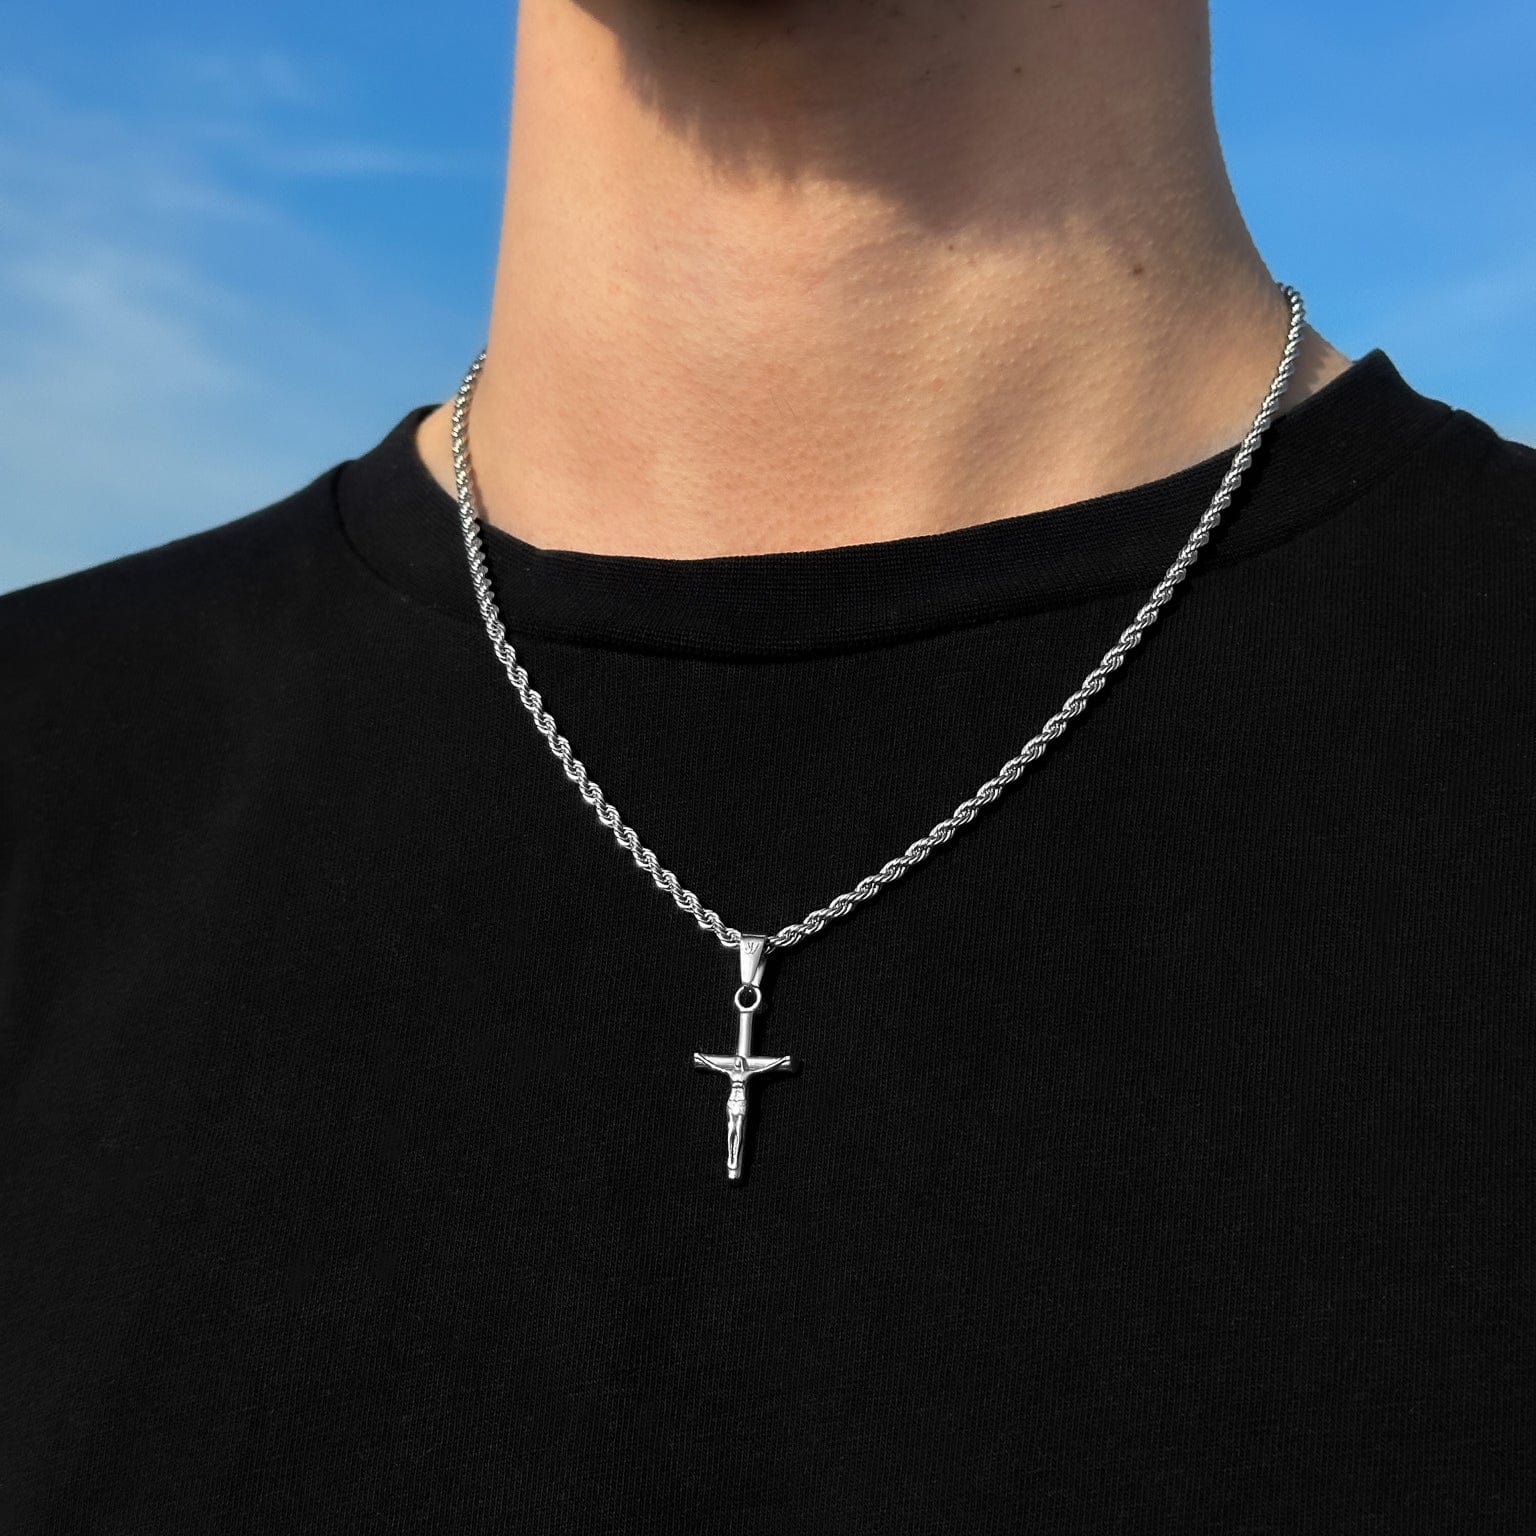 Chain with Pendant Jesus Cross Rope Chain - Silver (3mm) - JVillion® 